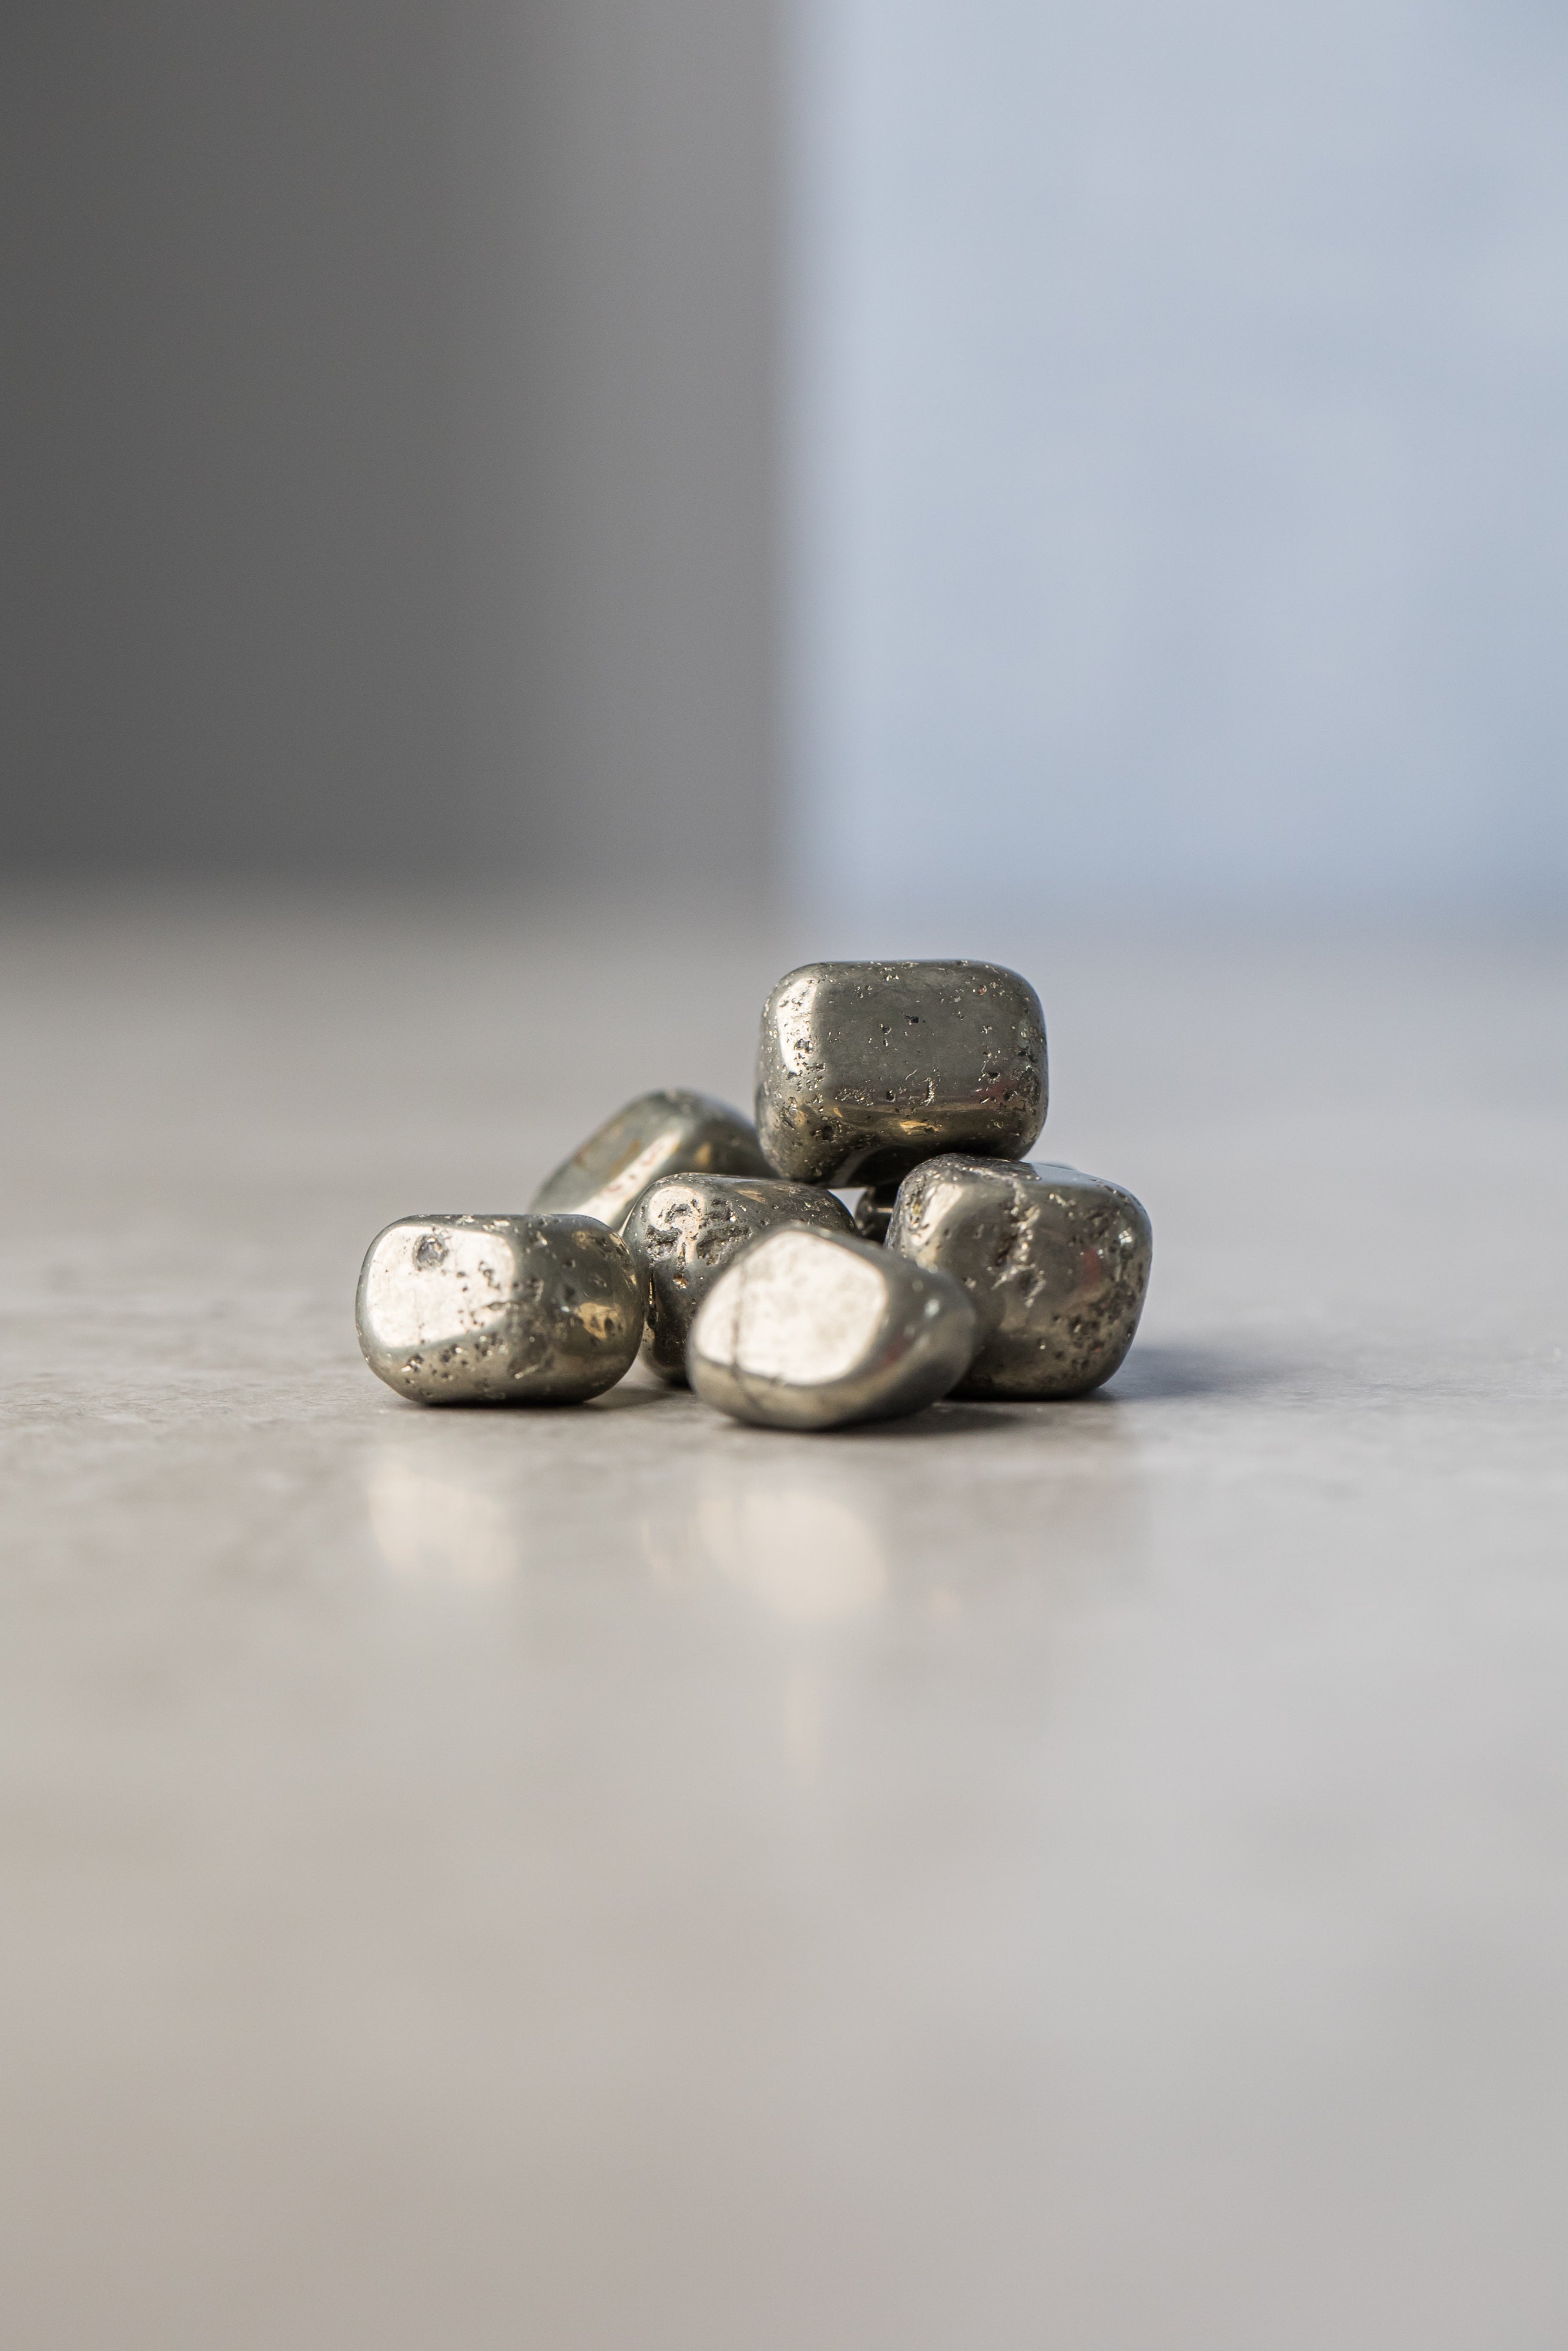 Pyrite - Sparkling Stone for Prosperity and Confidence - Everyday Rocks